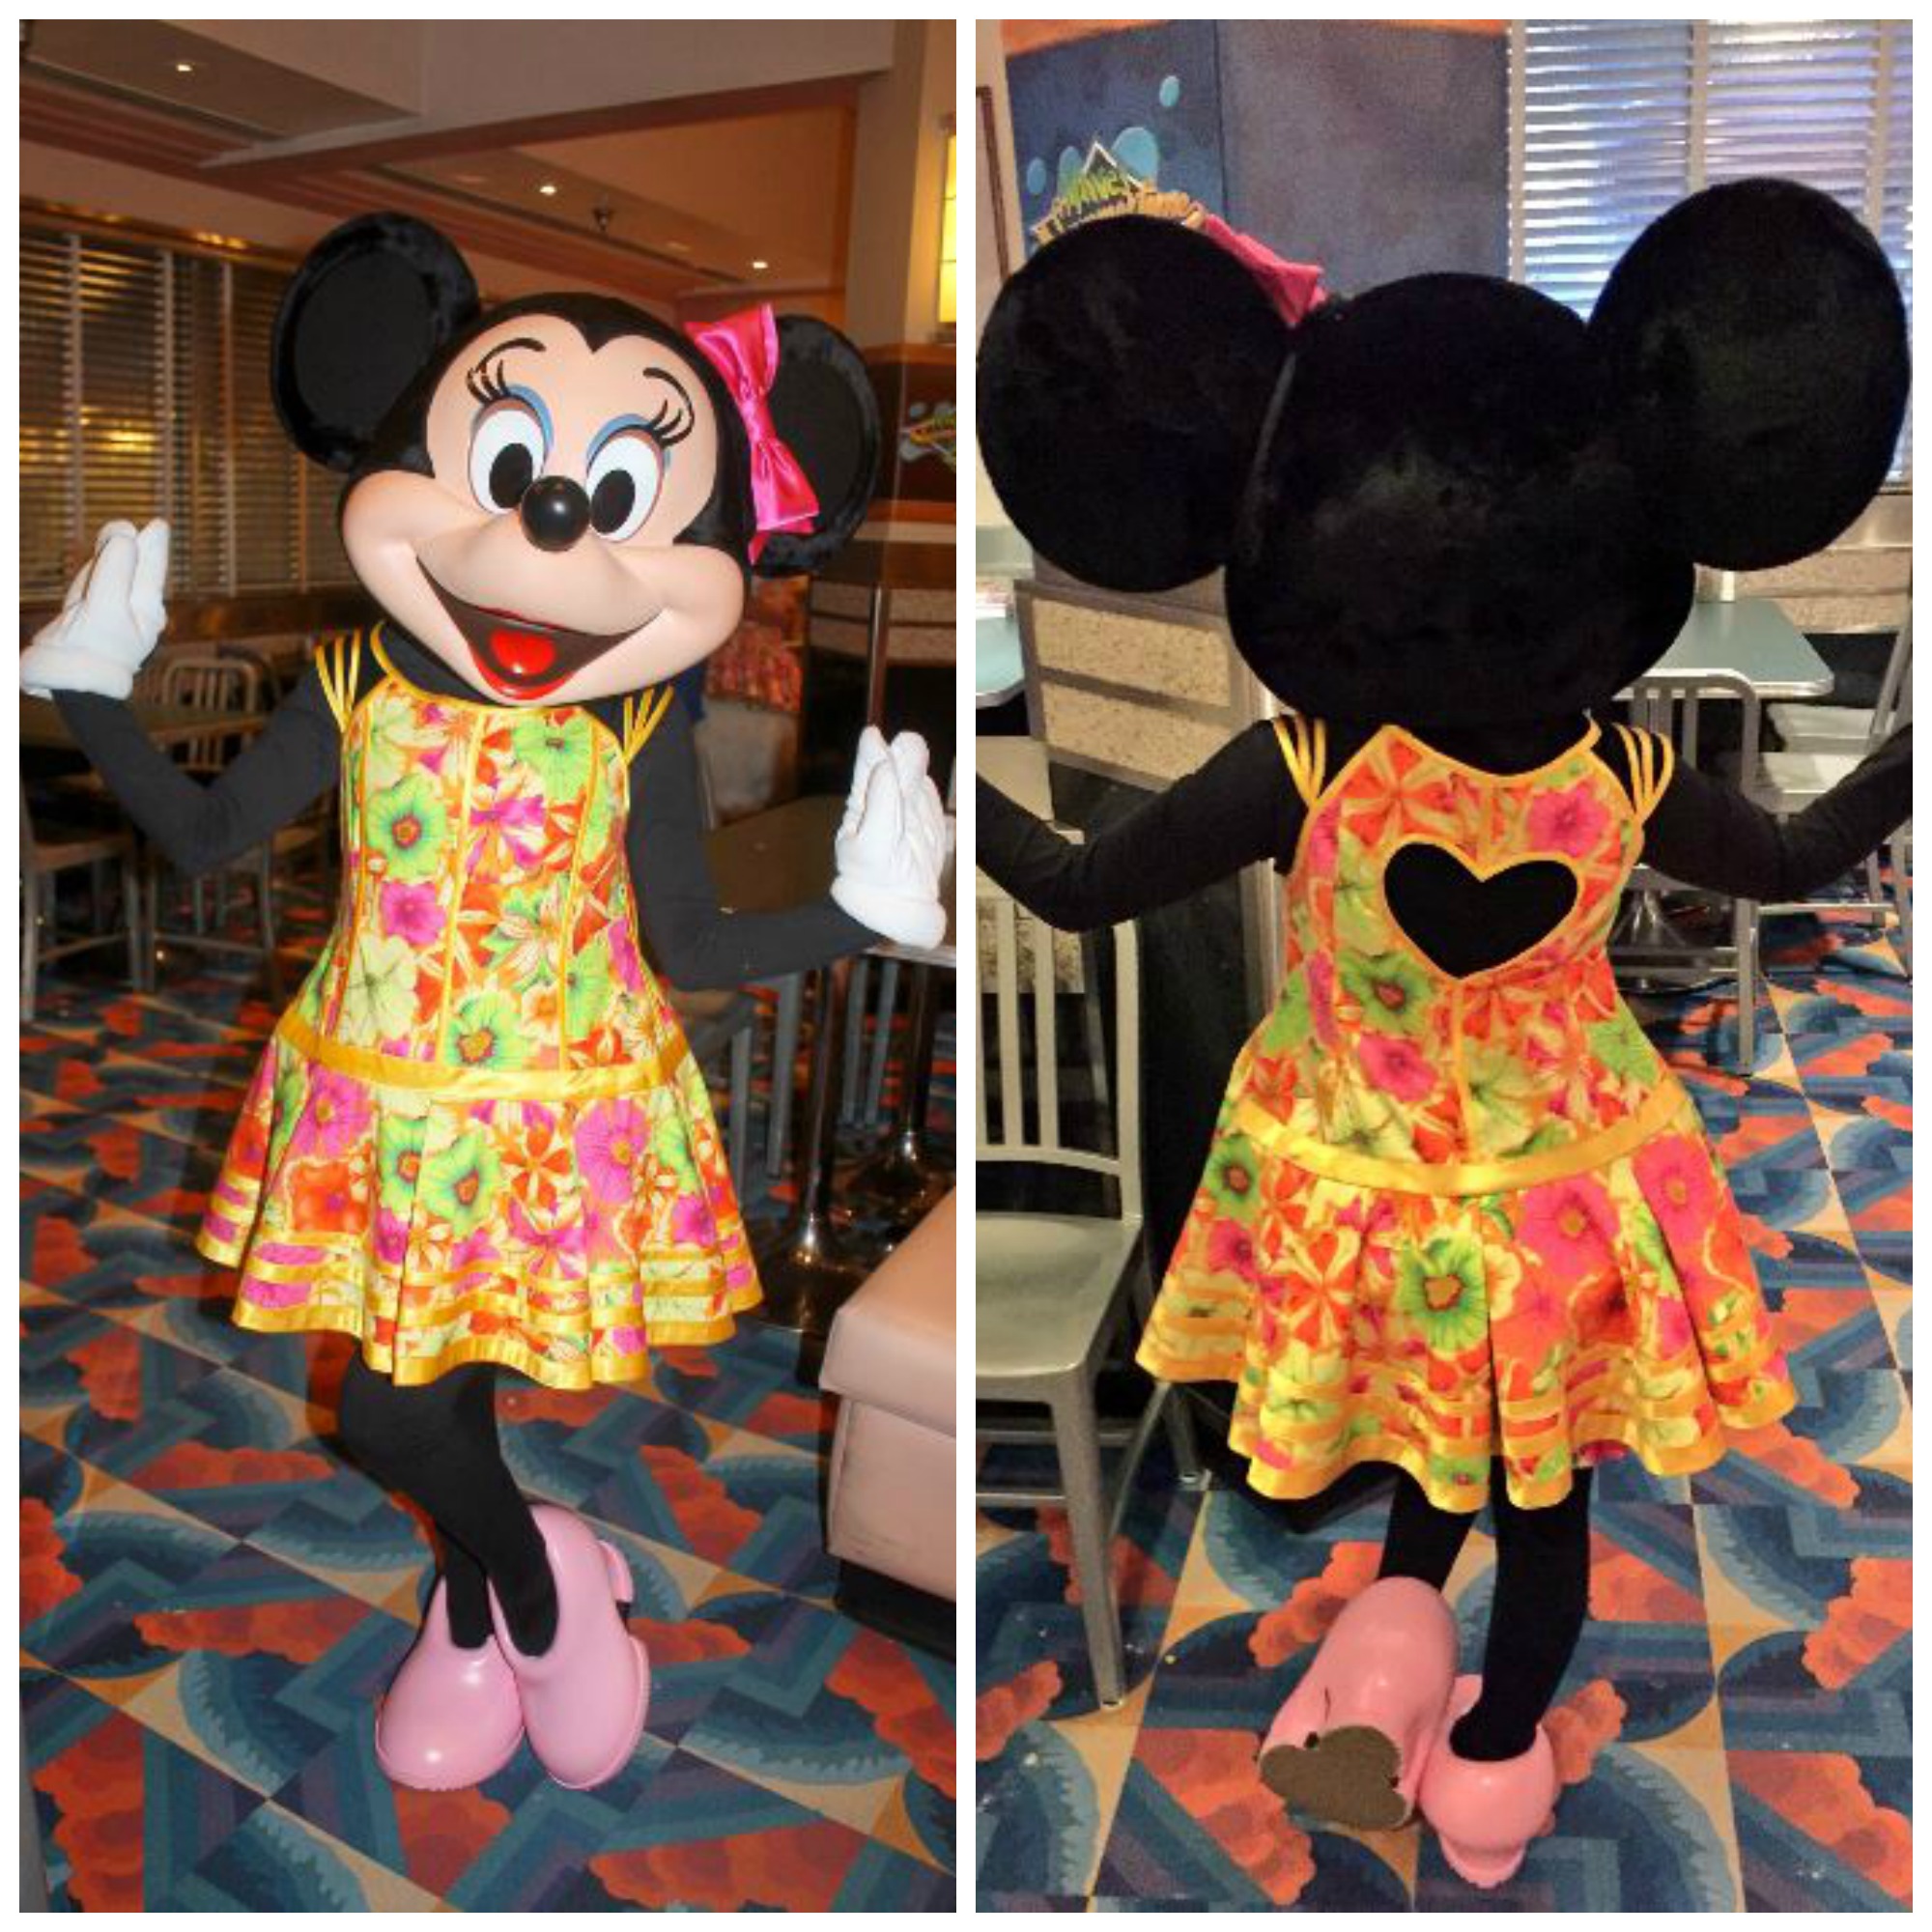 Cute Summer Outfits for the gang at Minnie’s Summertime Dine at Hollywood & Vine